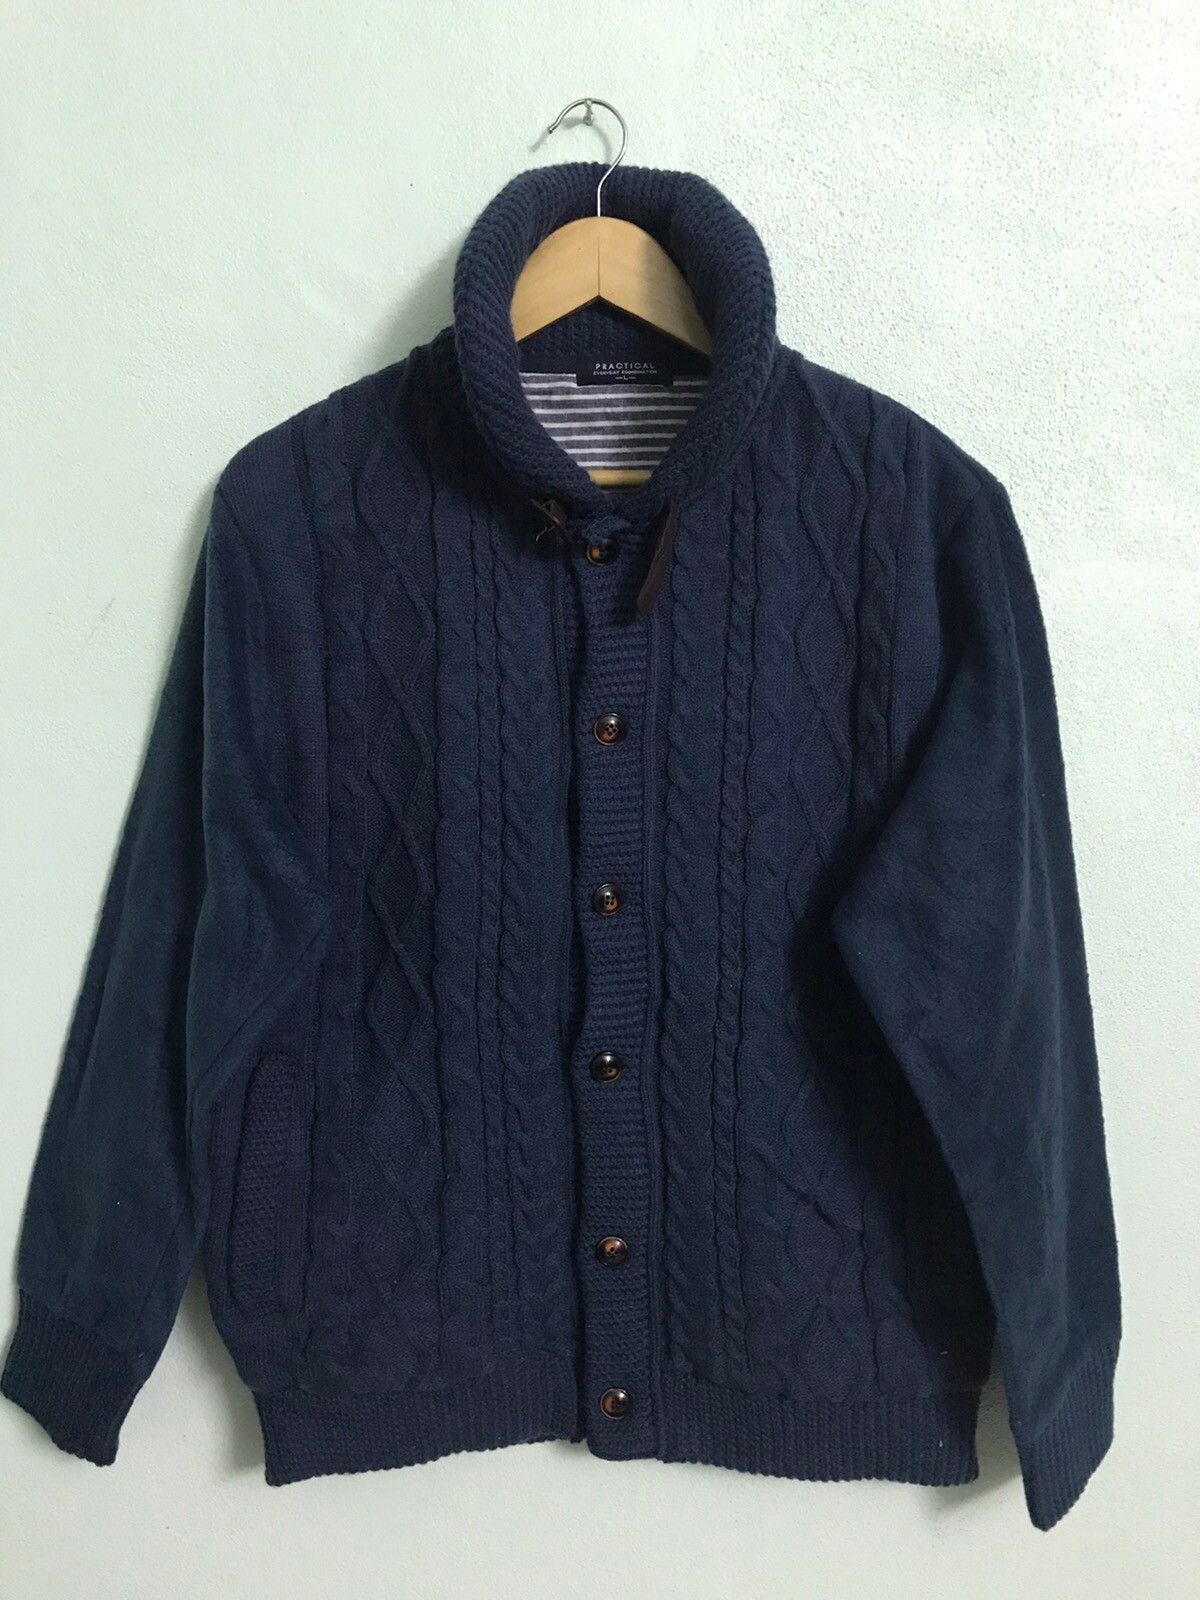 Japanese Brand - Practical cable knit fleece jacket - gh0220 - 1